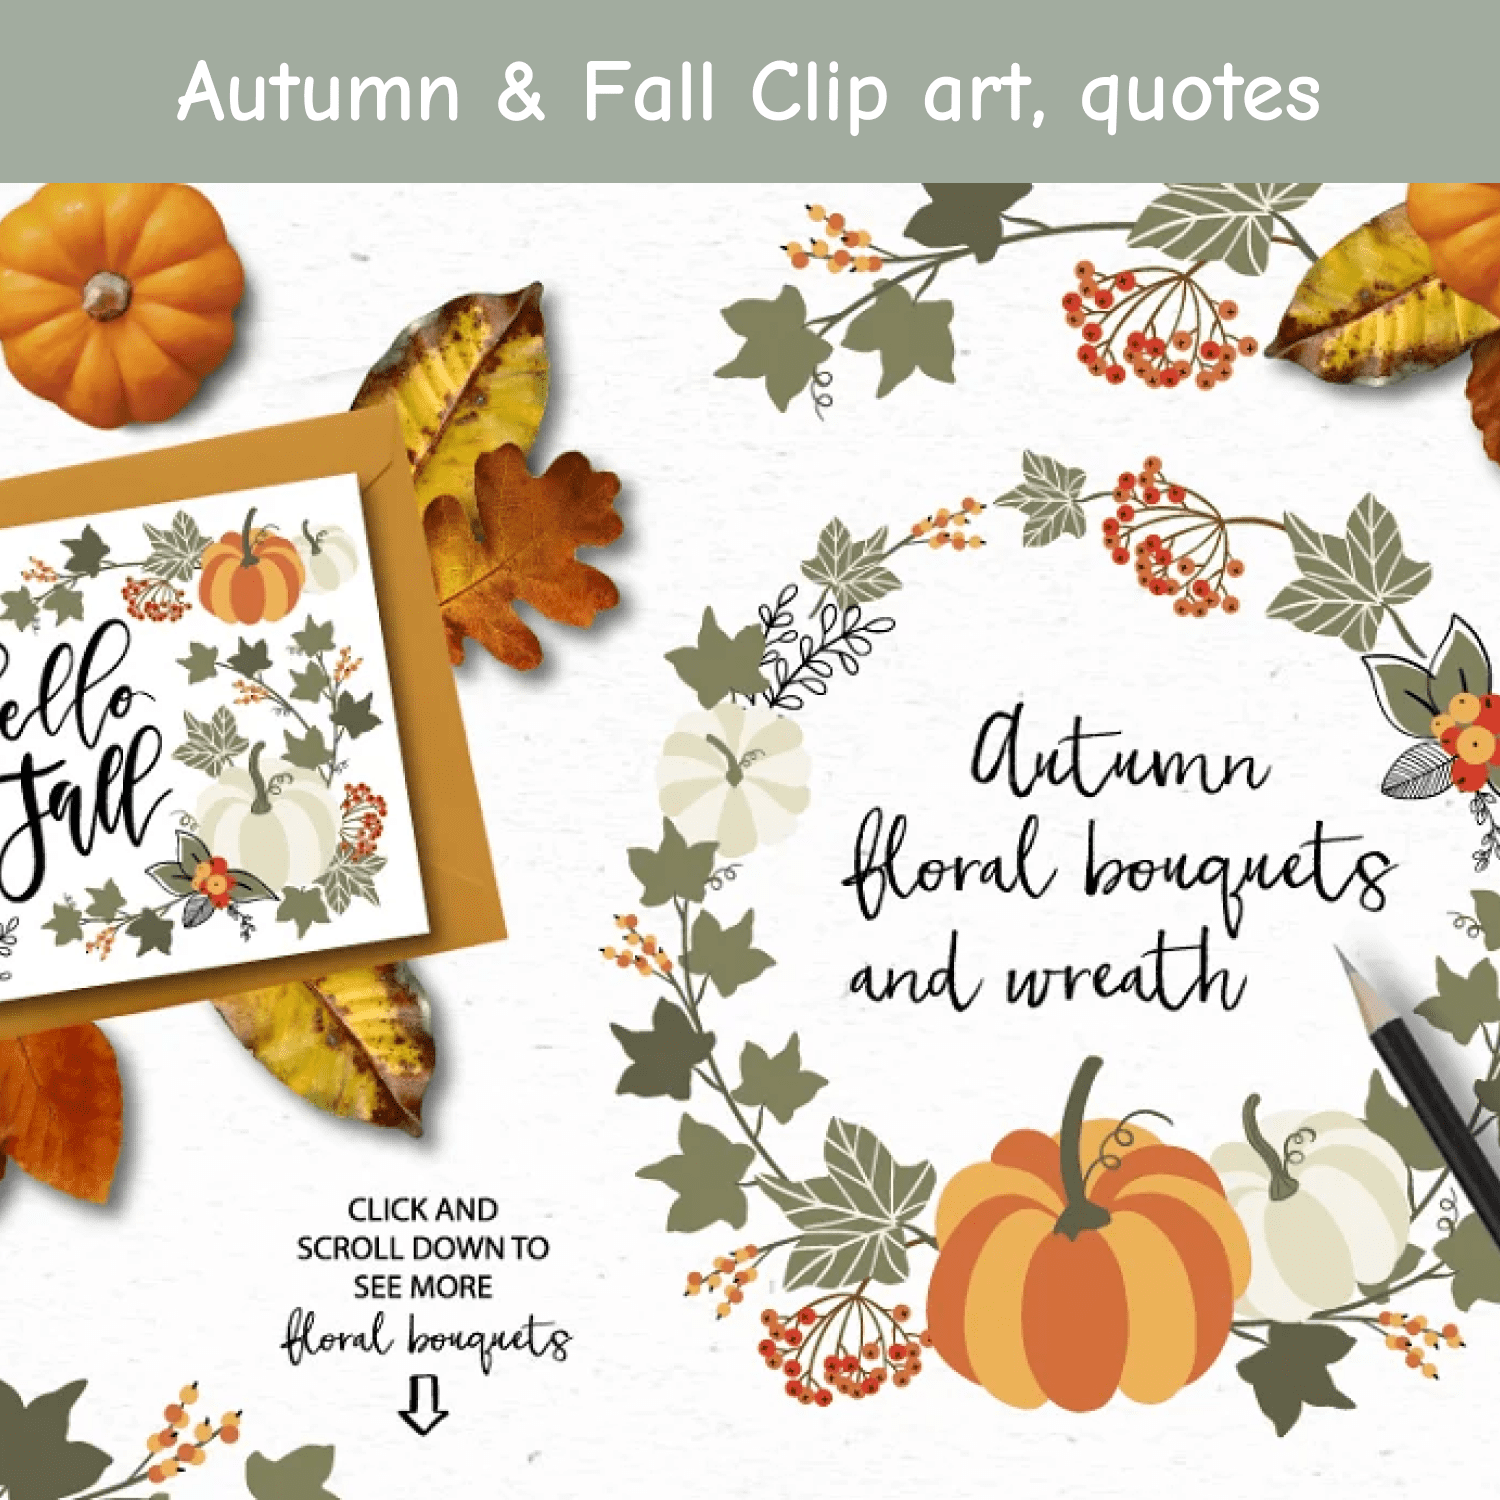 Autumn & Fall Clip art, quotes cover.